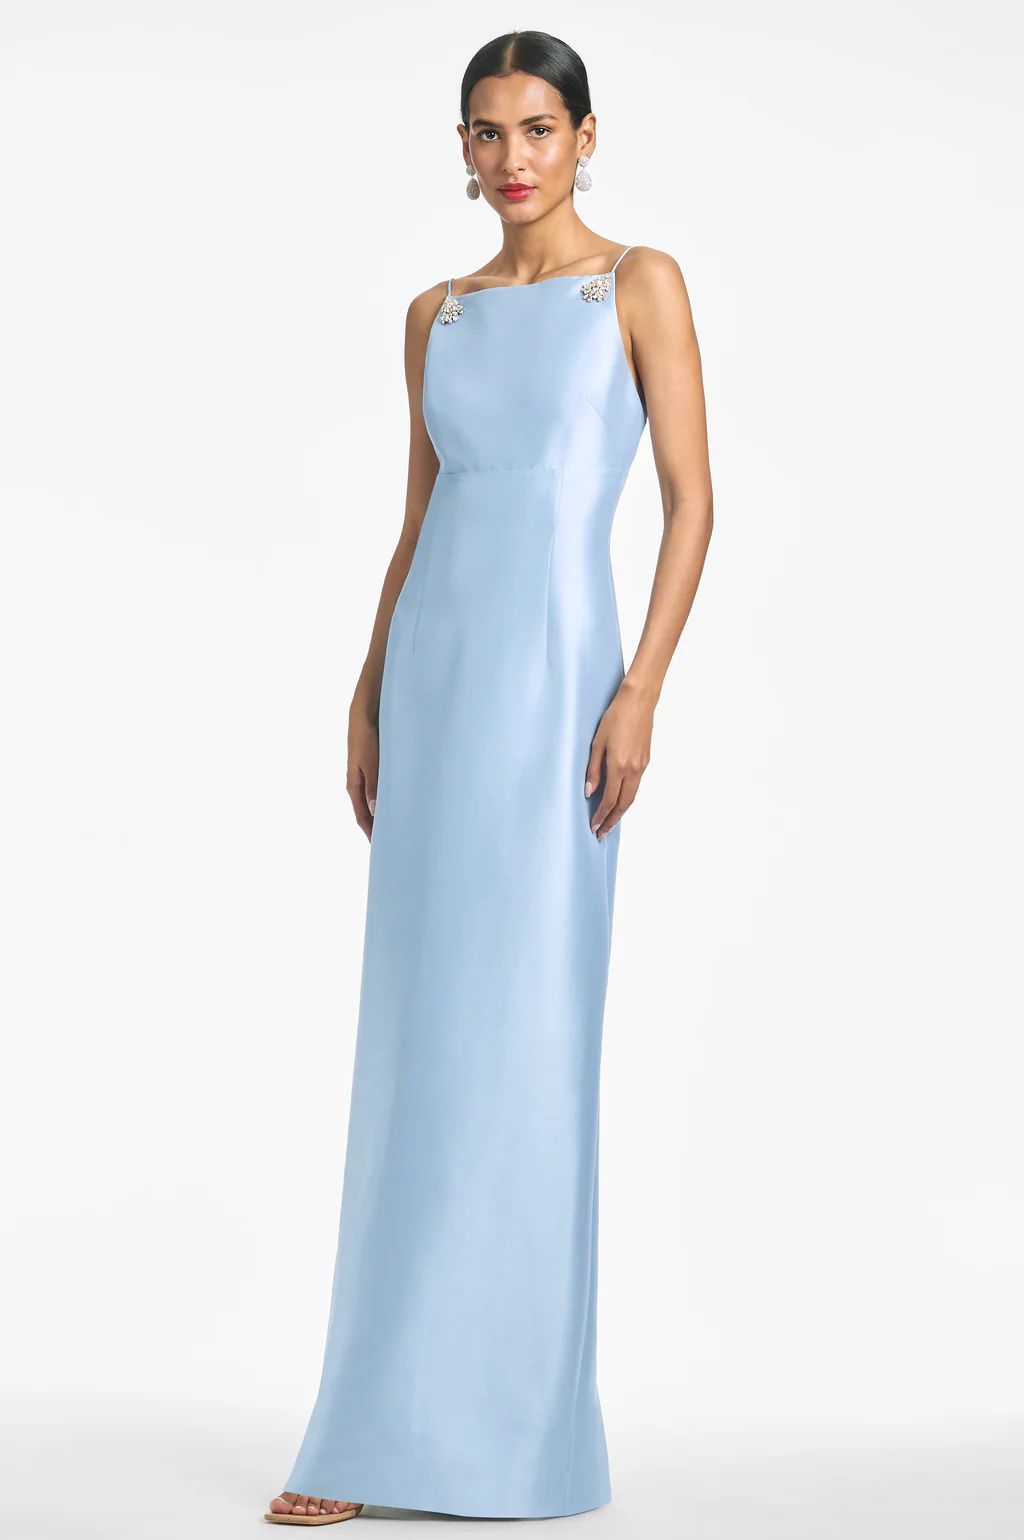 Pryce Gown - Glacial Blue | Sachin and Babi